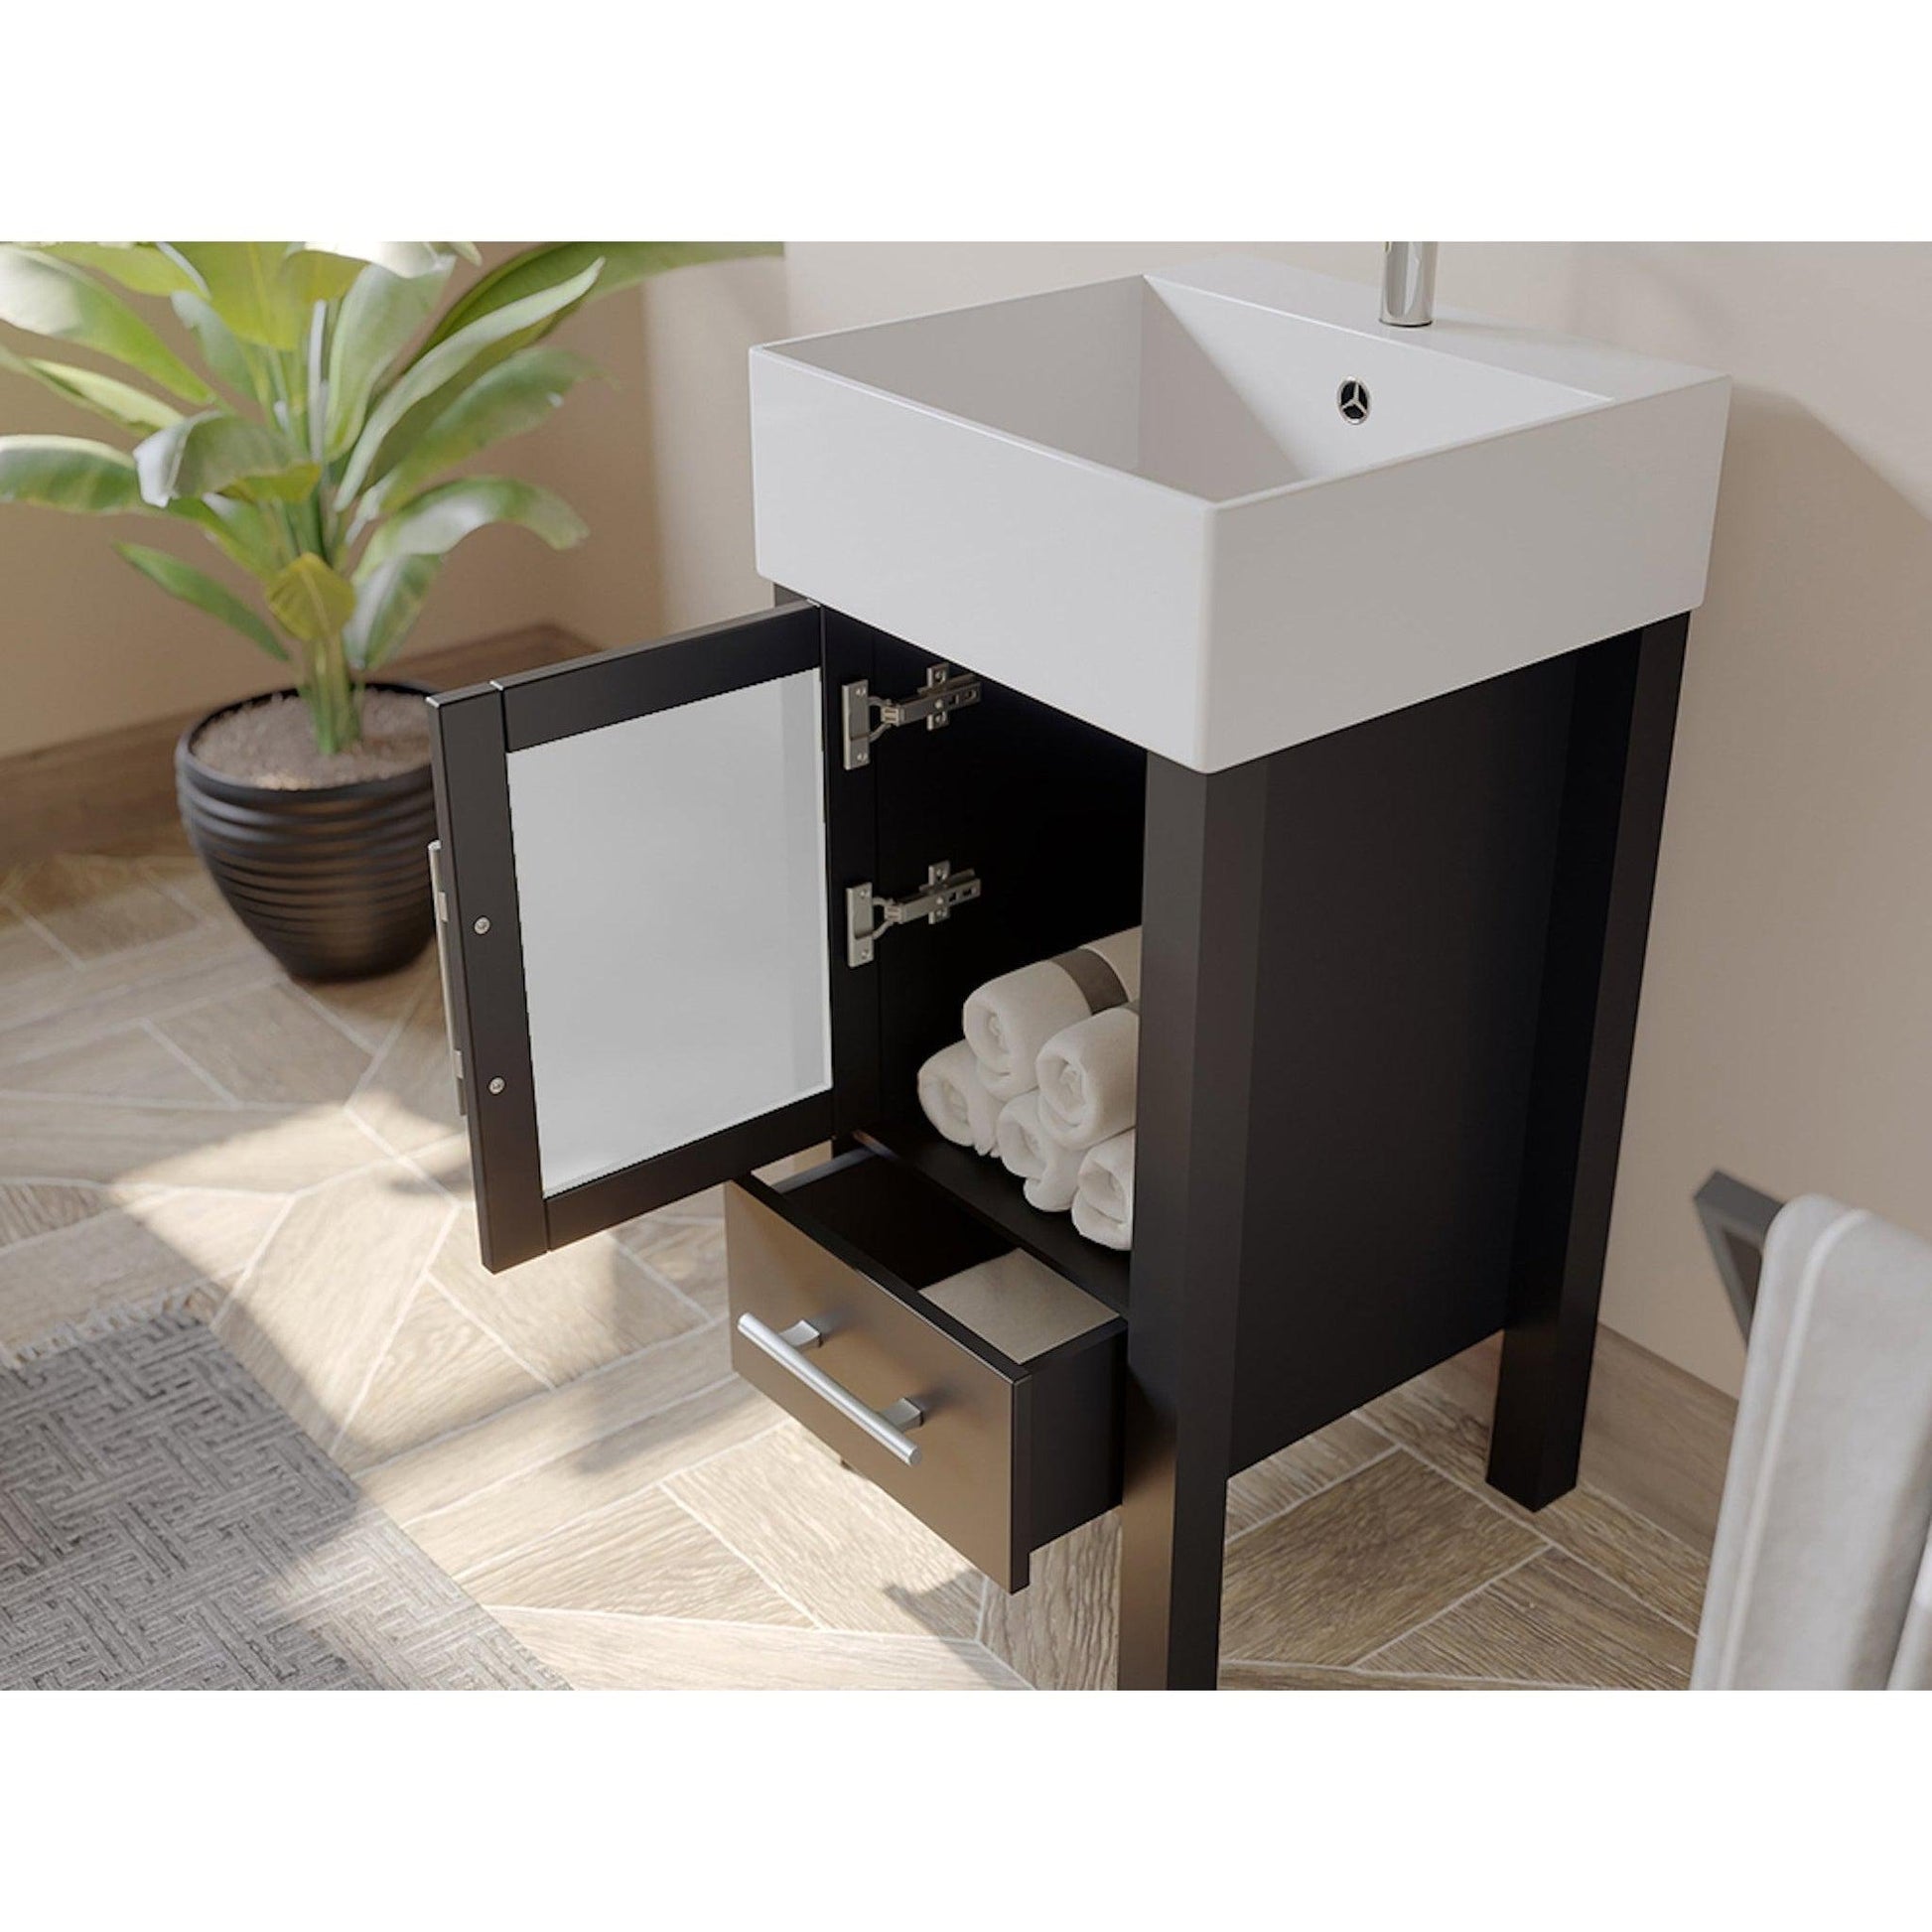 Cambridge Plumbing 18" Black Espresso Wood Single Vanity Set With Porcelain Countertop And Square Vessel Sink With Faucet Hole And Brushed Nickel Plumbing Finish